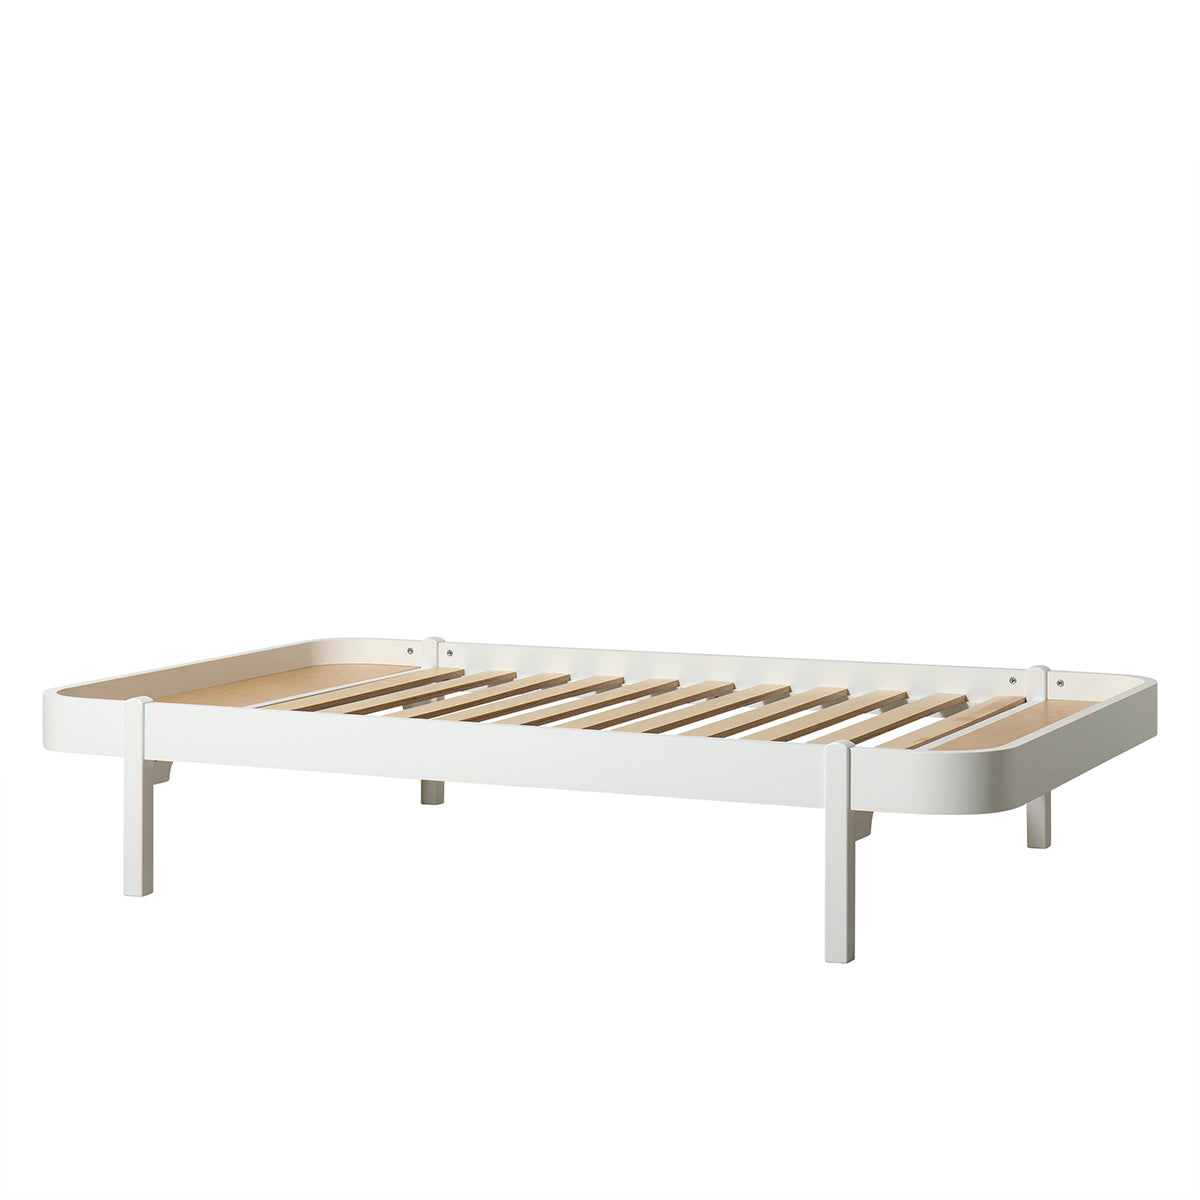 Oliver Furniture Wood Lounger, 120 x 200 cm, weiss